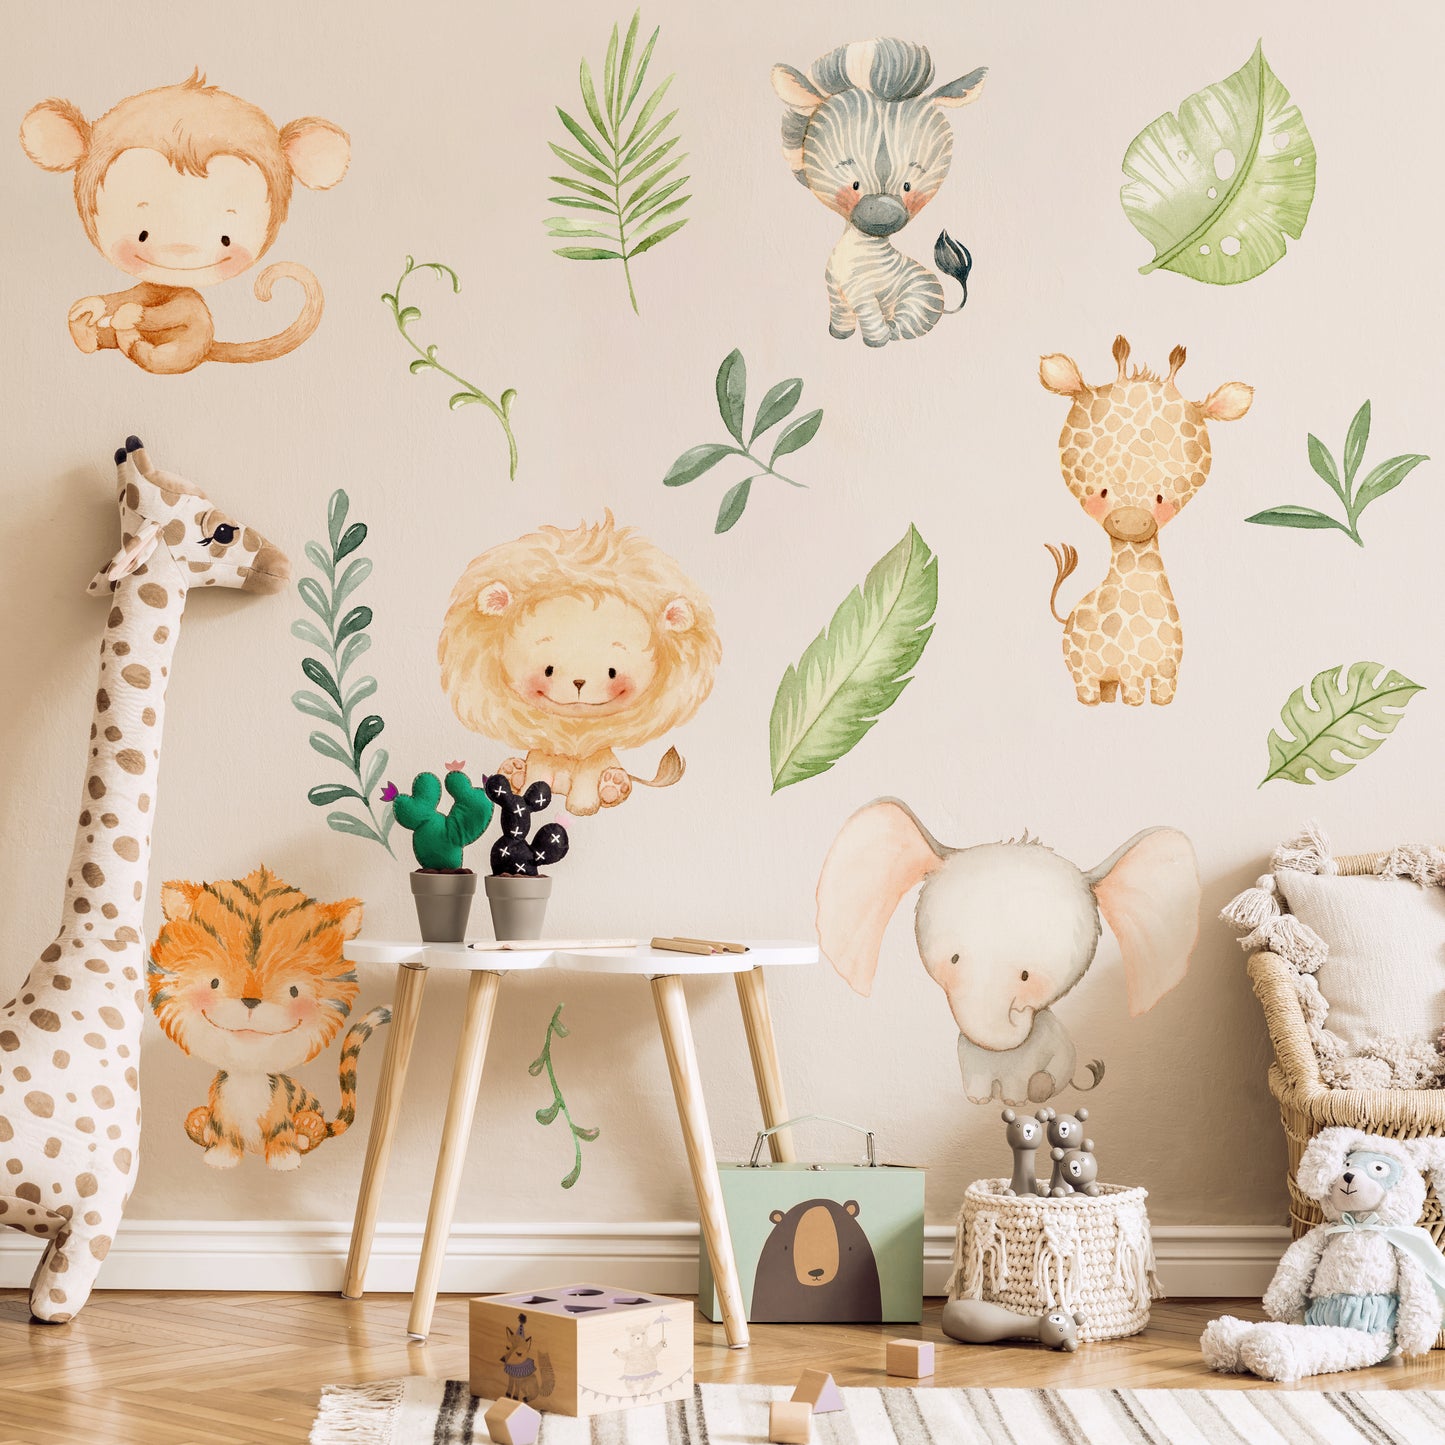 Baby Jungle - Baby Jungle Animals and Leaves Nursery Wall Sticker Pack